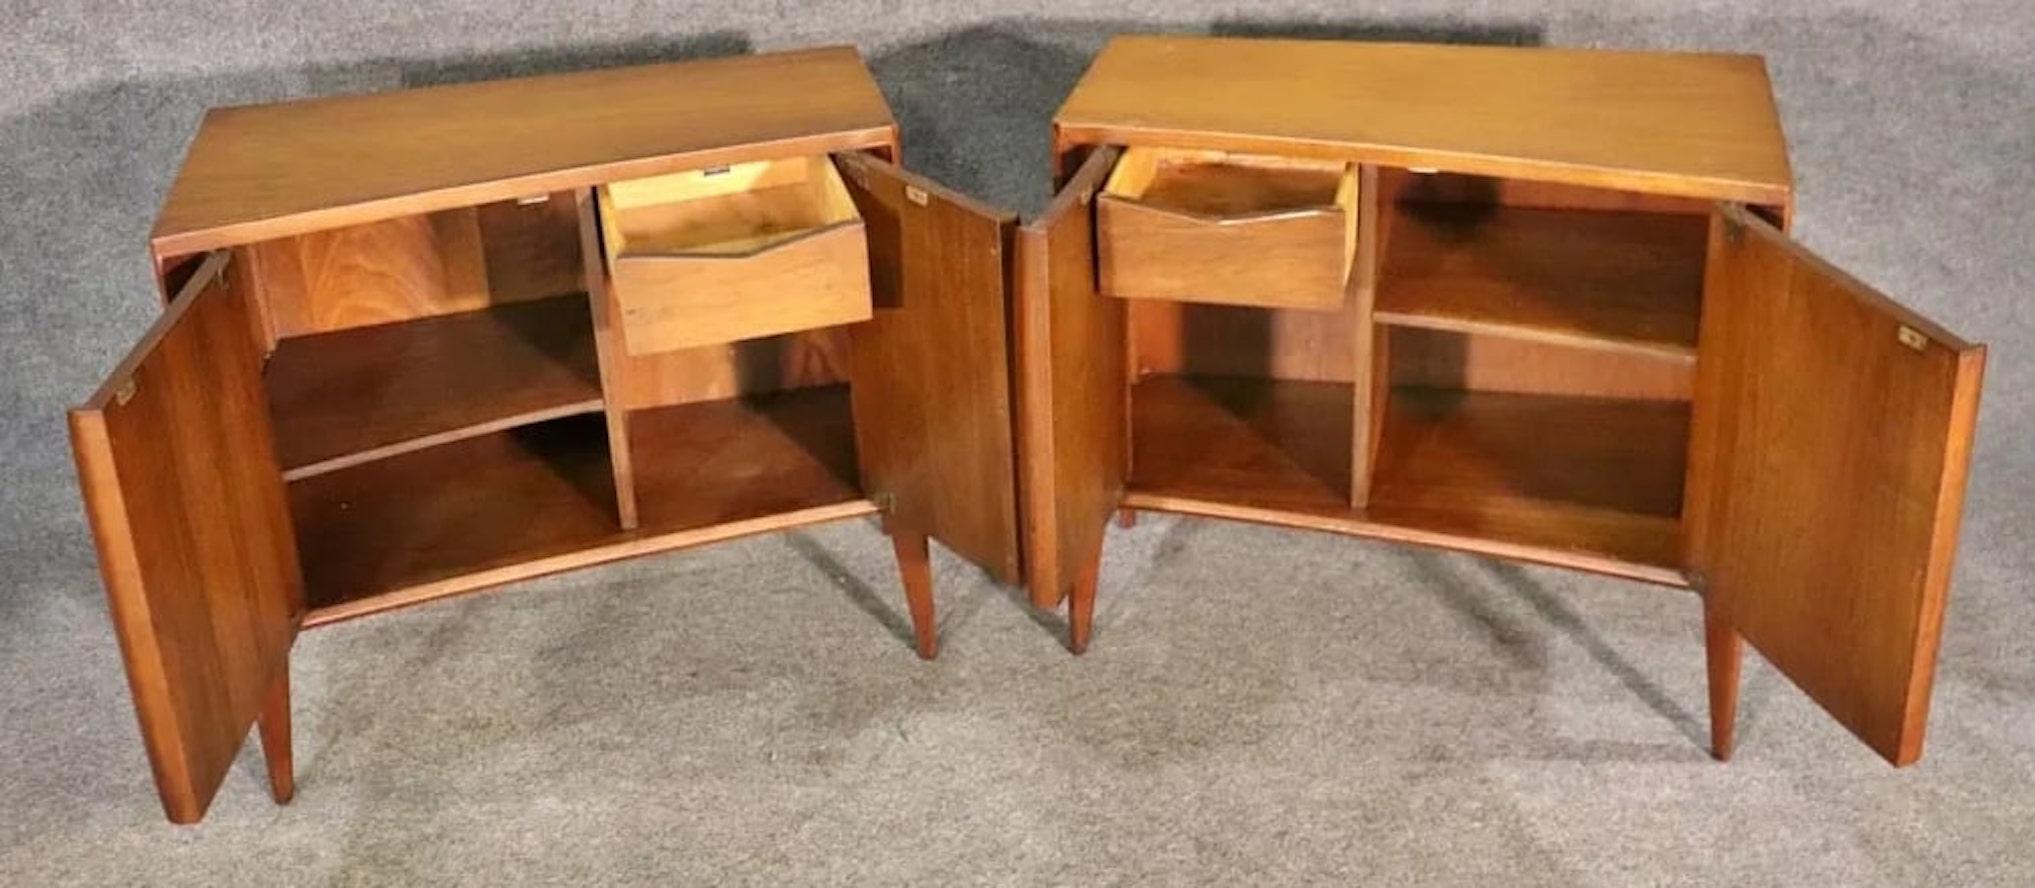 Pair of mid-century end tables with storage by Unagusta. Two doors each with storage compartments, sculpted fronts and tapered legs.
Please confirm location NY or NJ